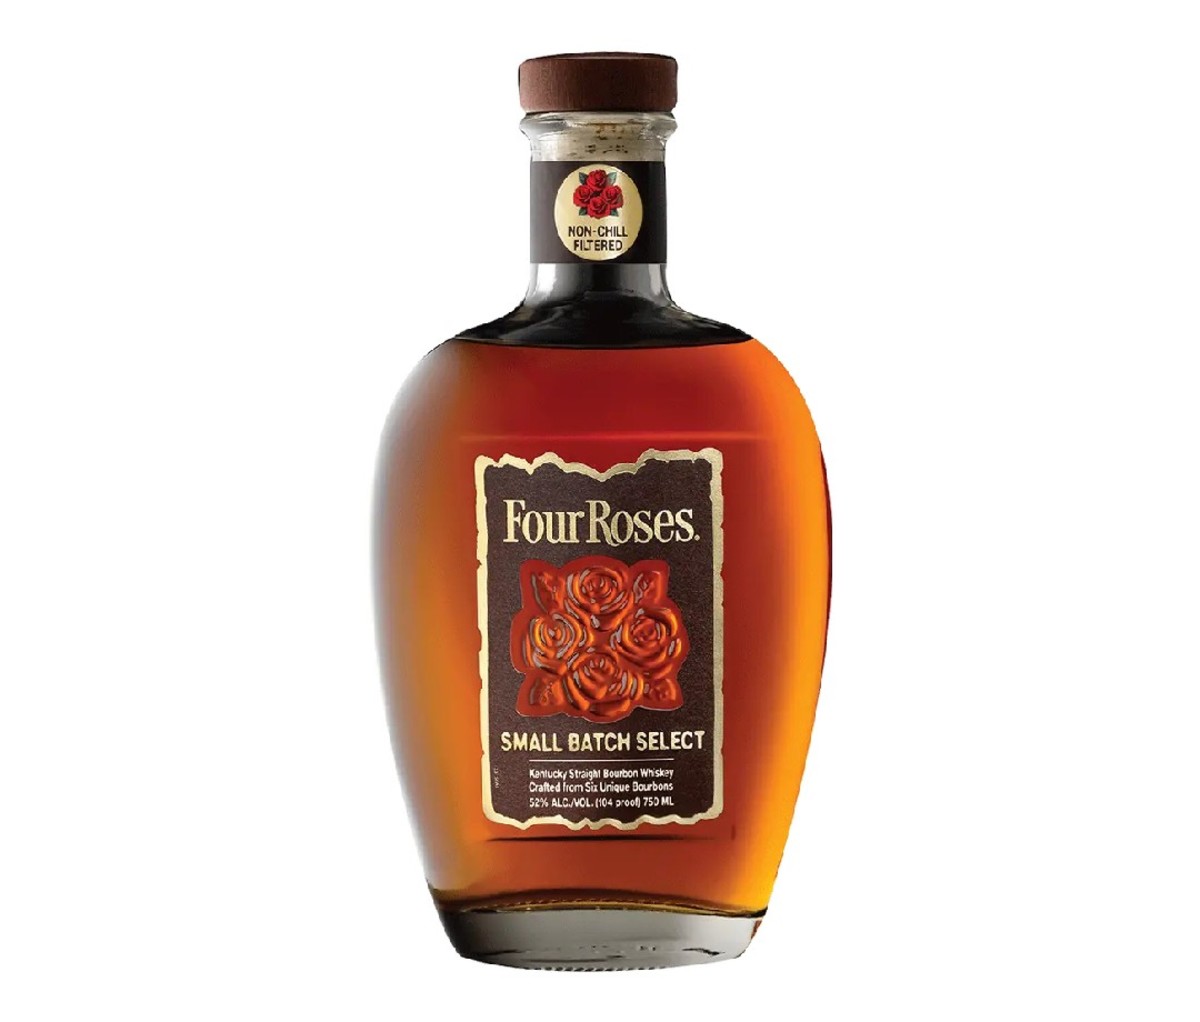 A bottle of Four Roses Small Batch Reserve